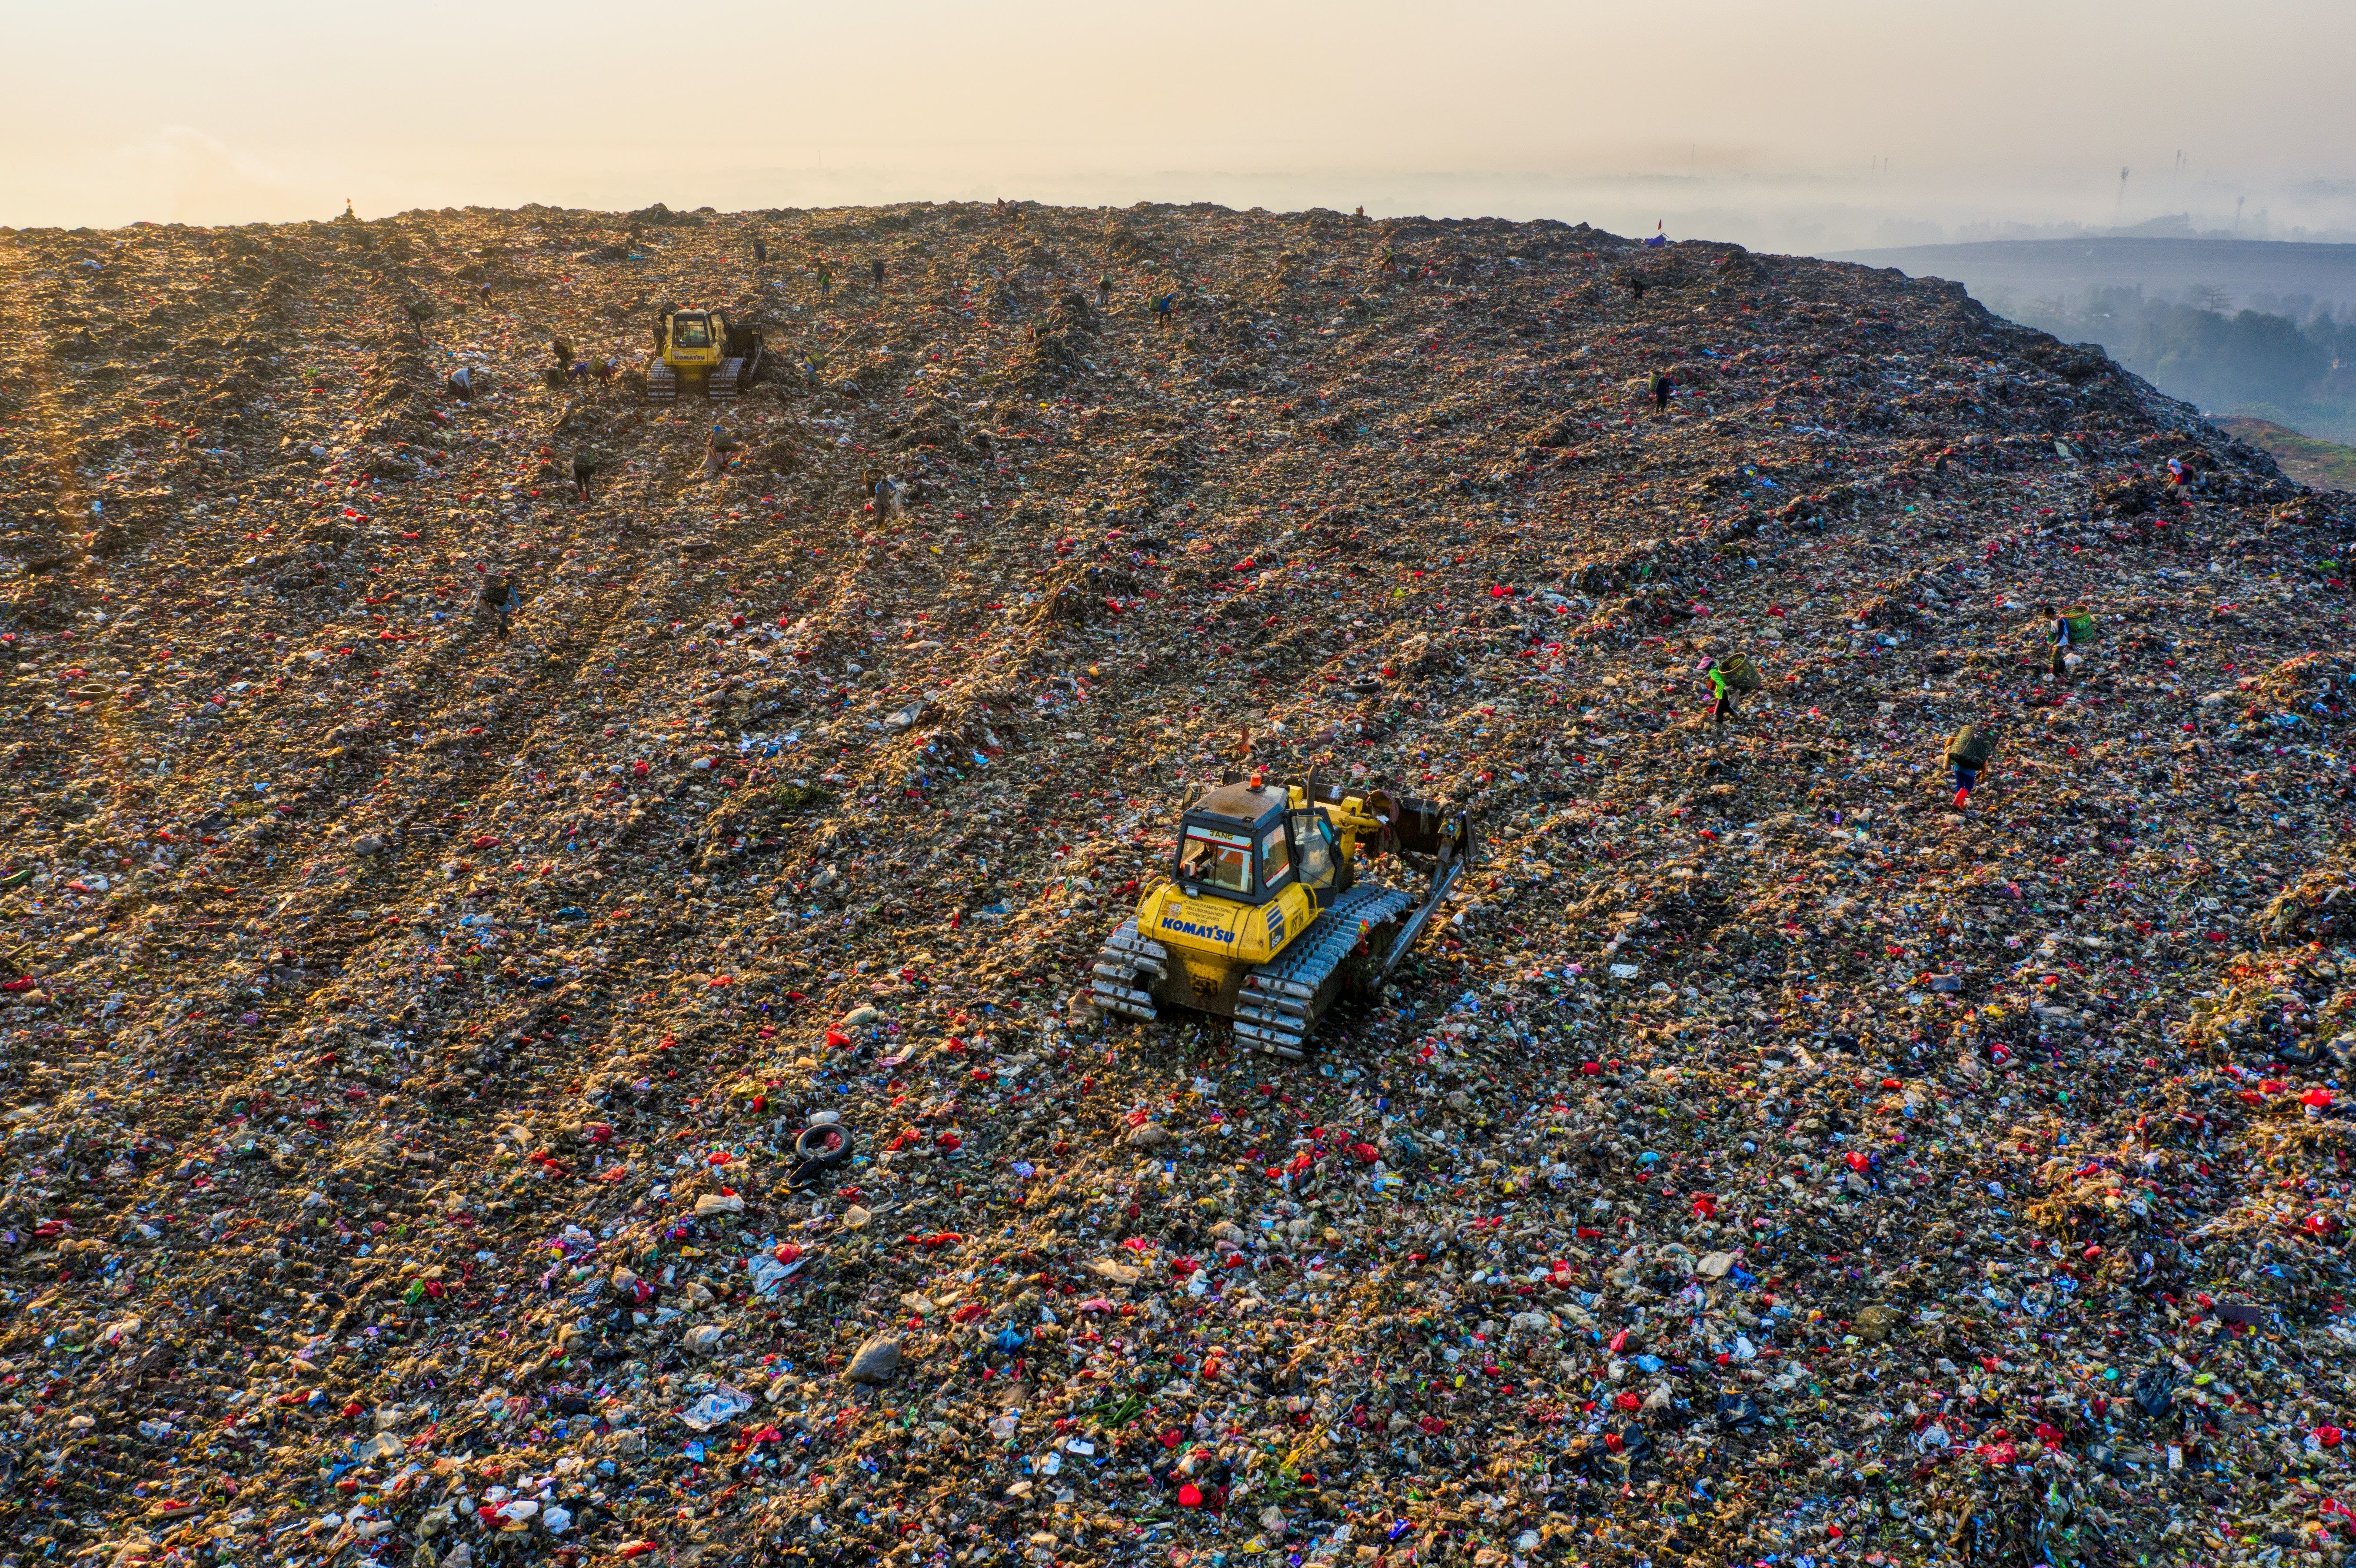 Meet A Man On A Quest To Find About $180 Million In Bitcoin Buried In A Landfill